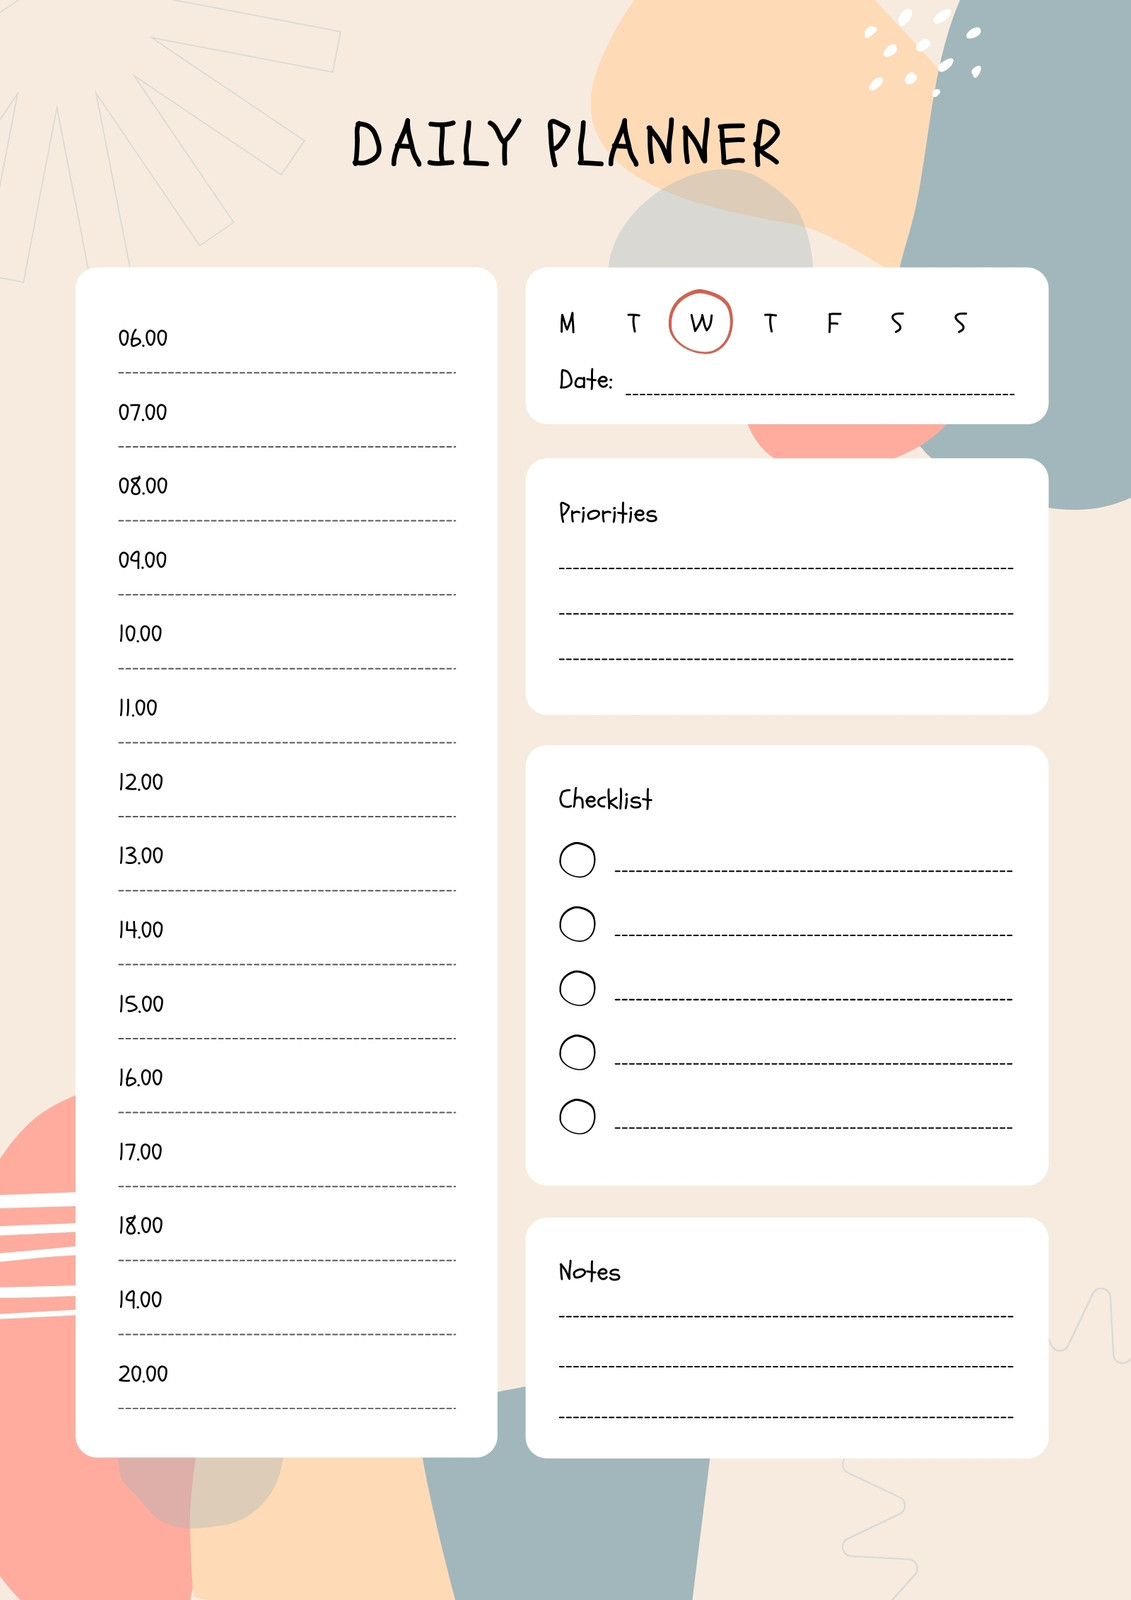 Page 15 - Free daily planner templates to customize | Canva